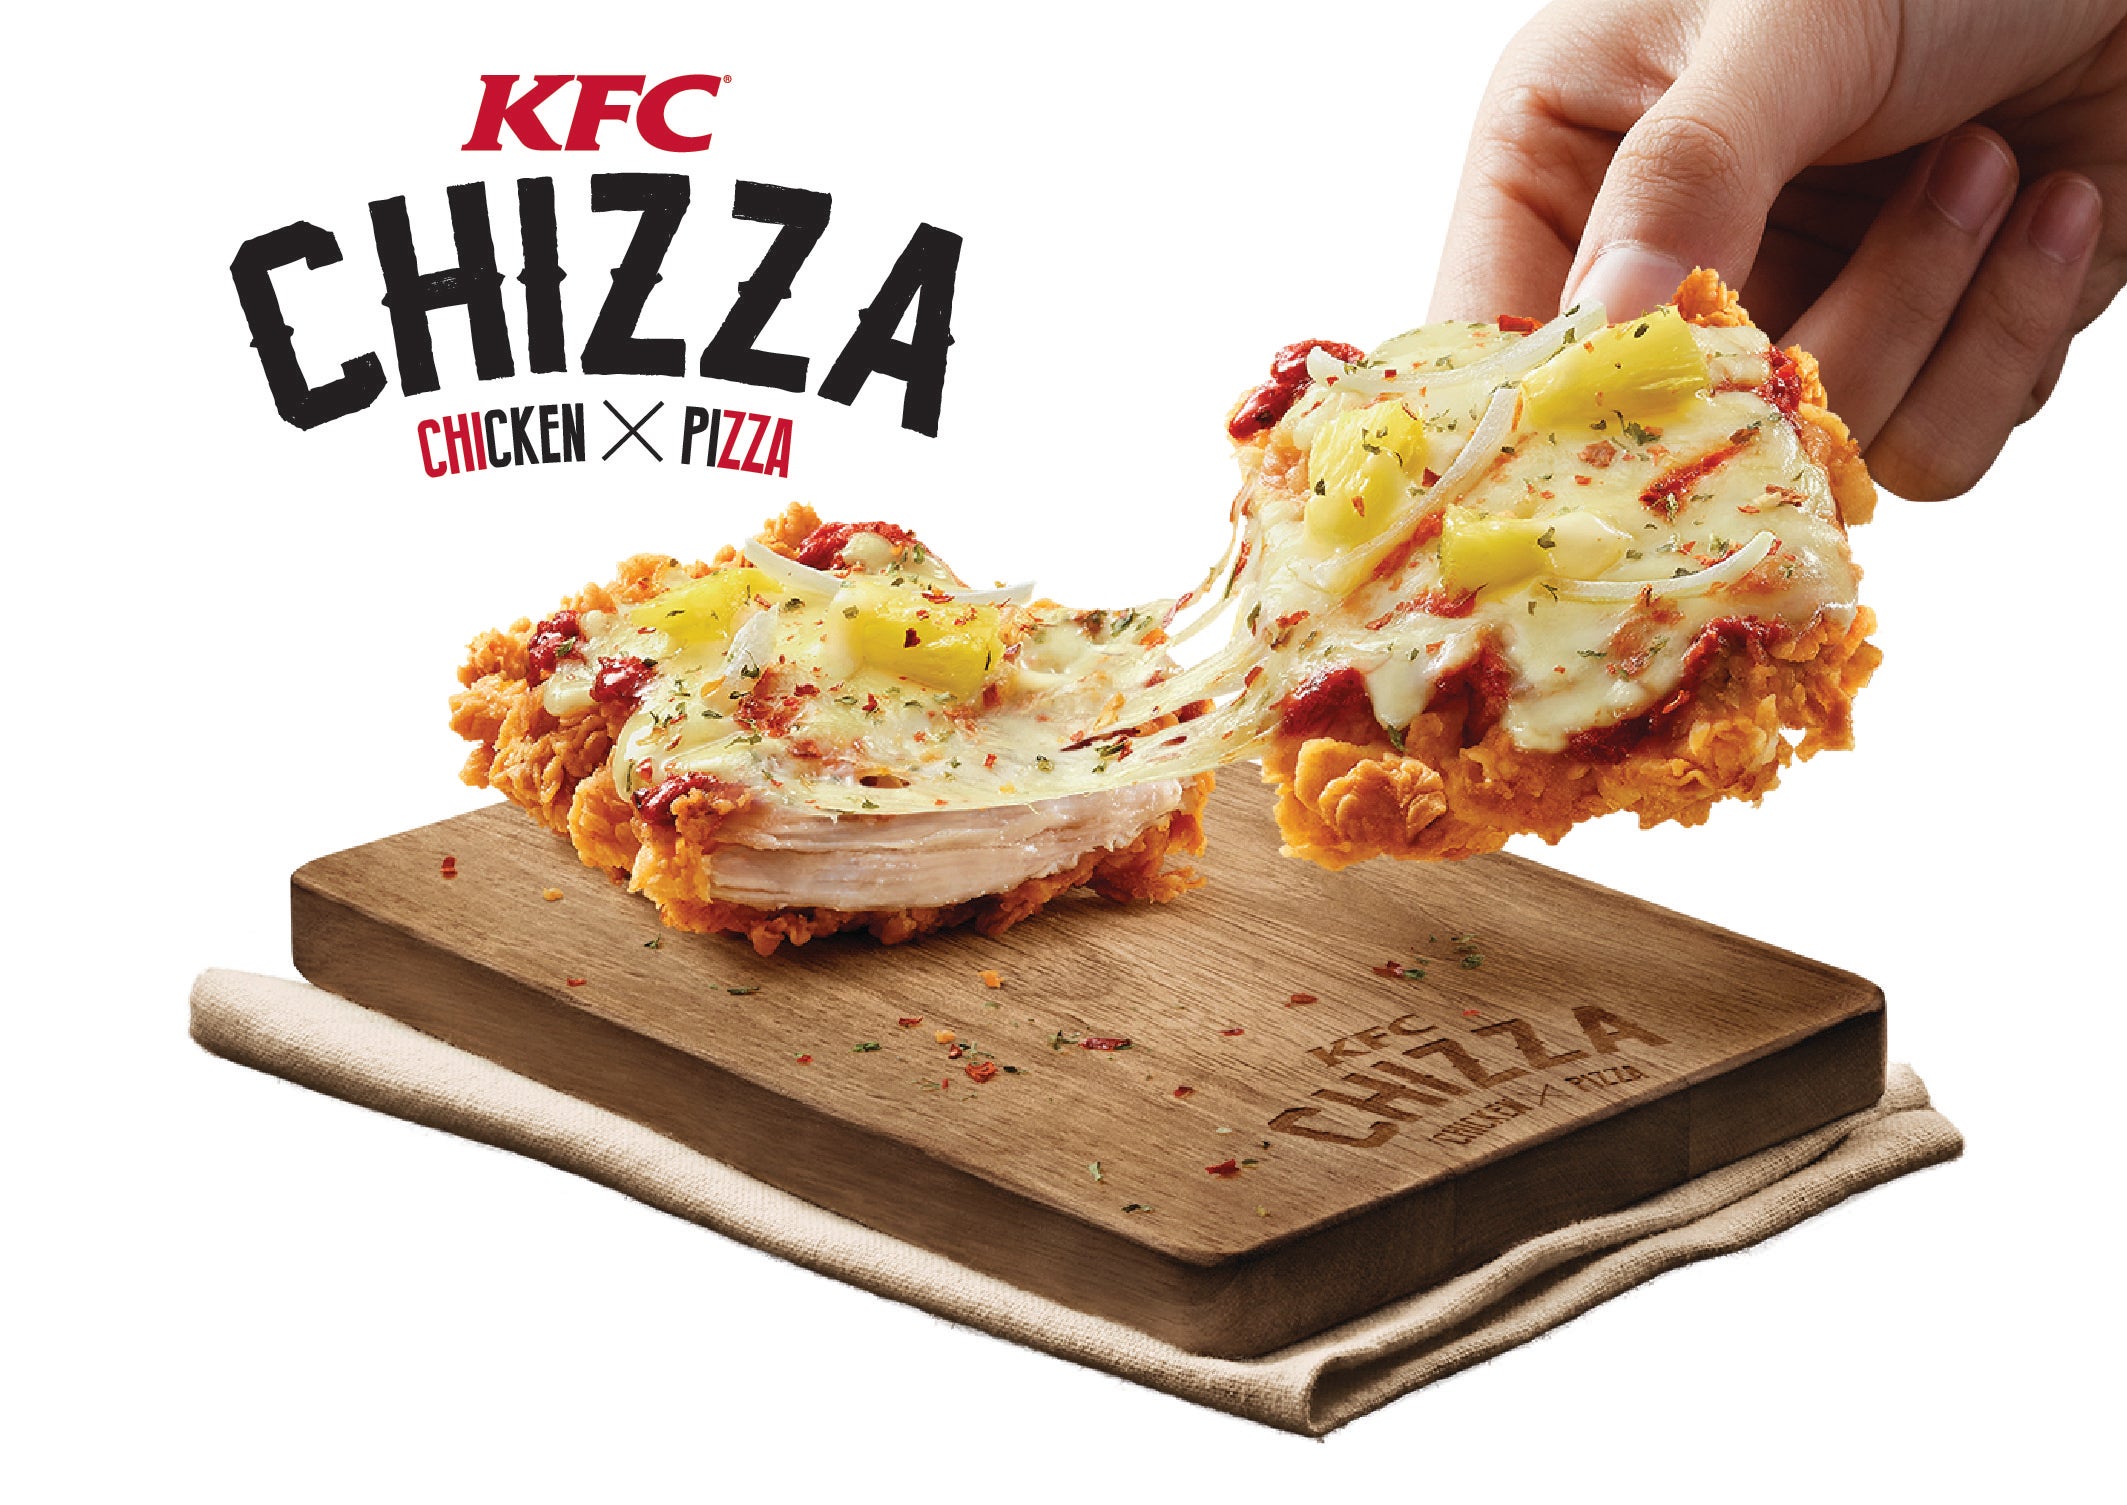 We Tried KFC's New Chizza Recipe And It's Better Than We Expected! - WORLD OF BUZZ 3